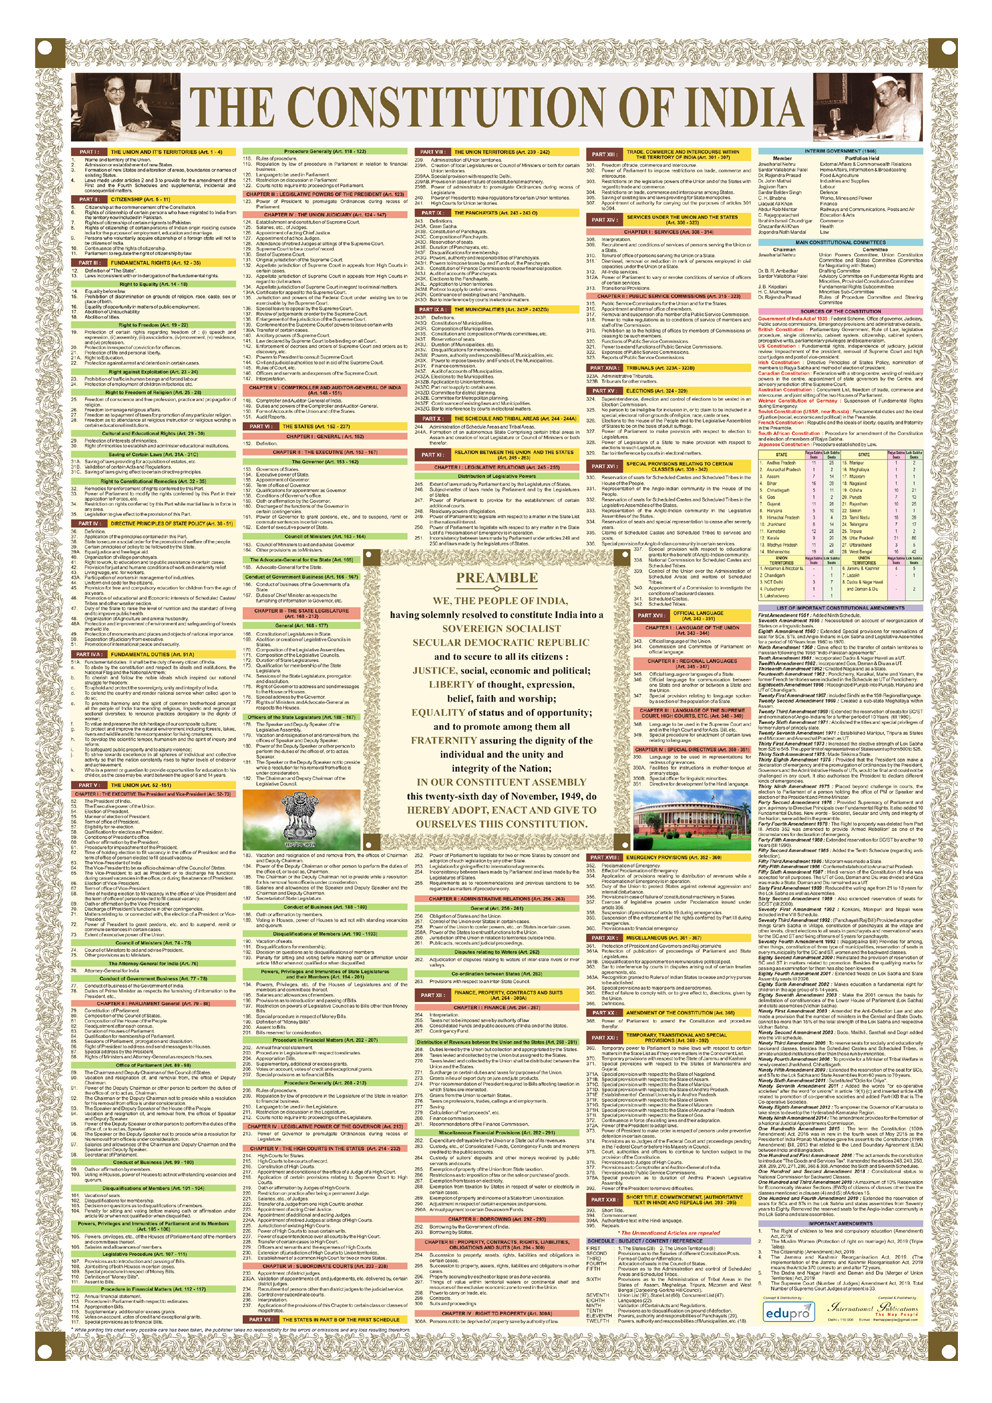 Buy INDIA CONSTITUTION CHART SIZE 100x70 CM (40x 28 inch) with